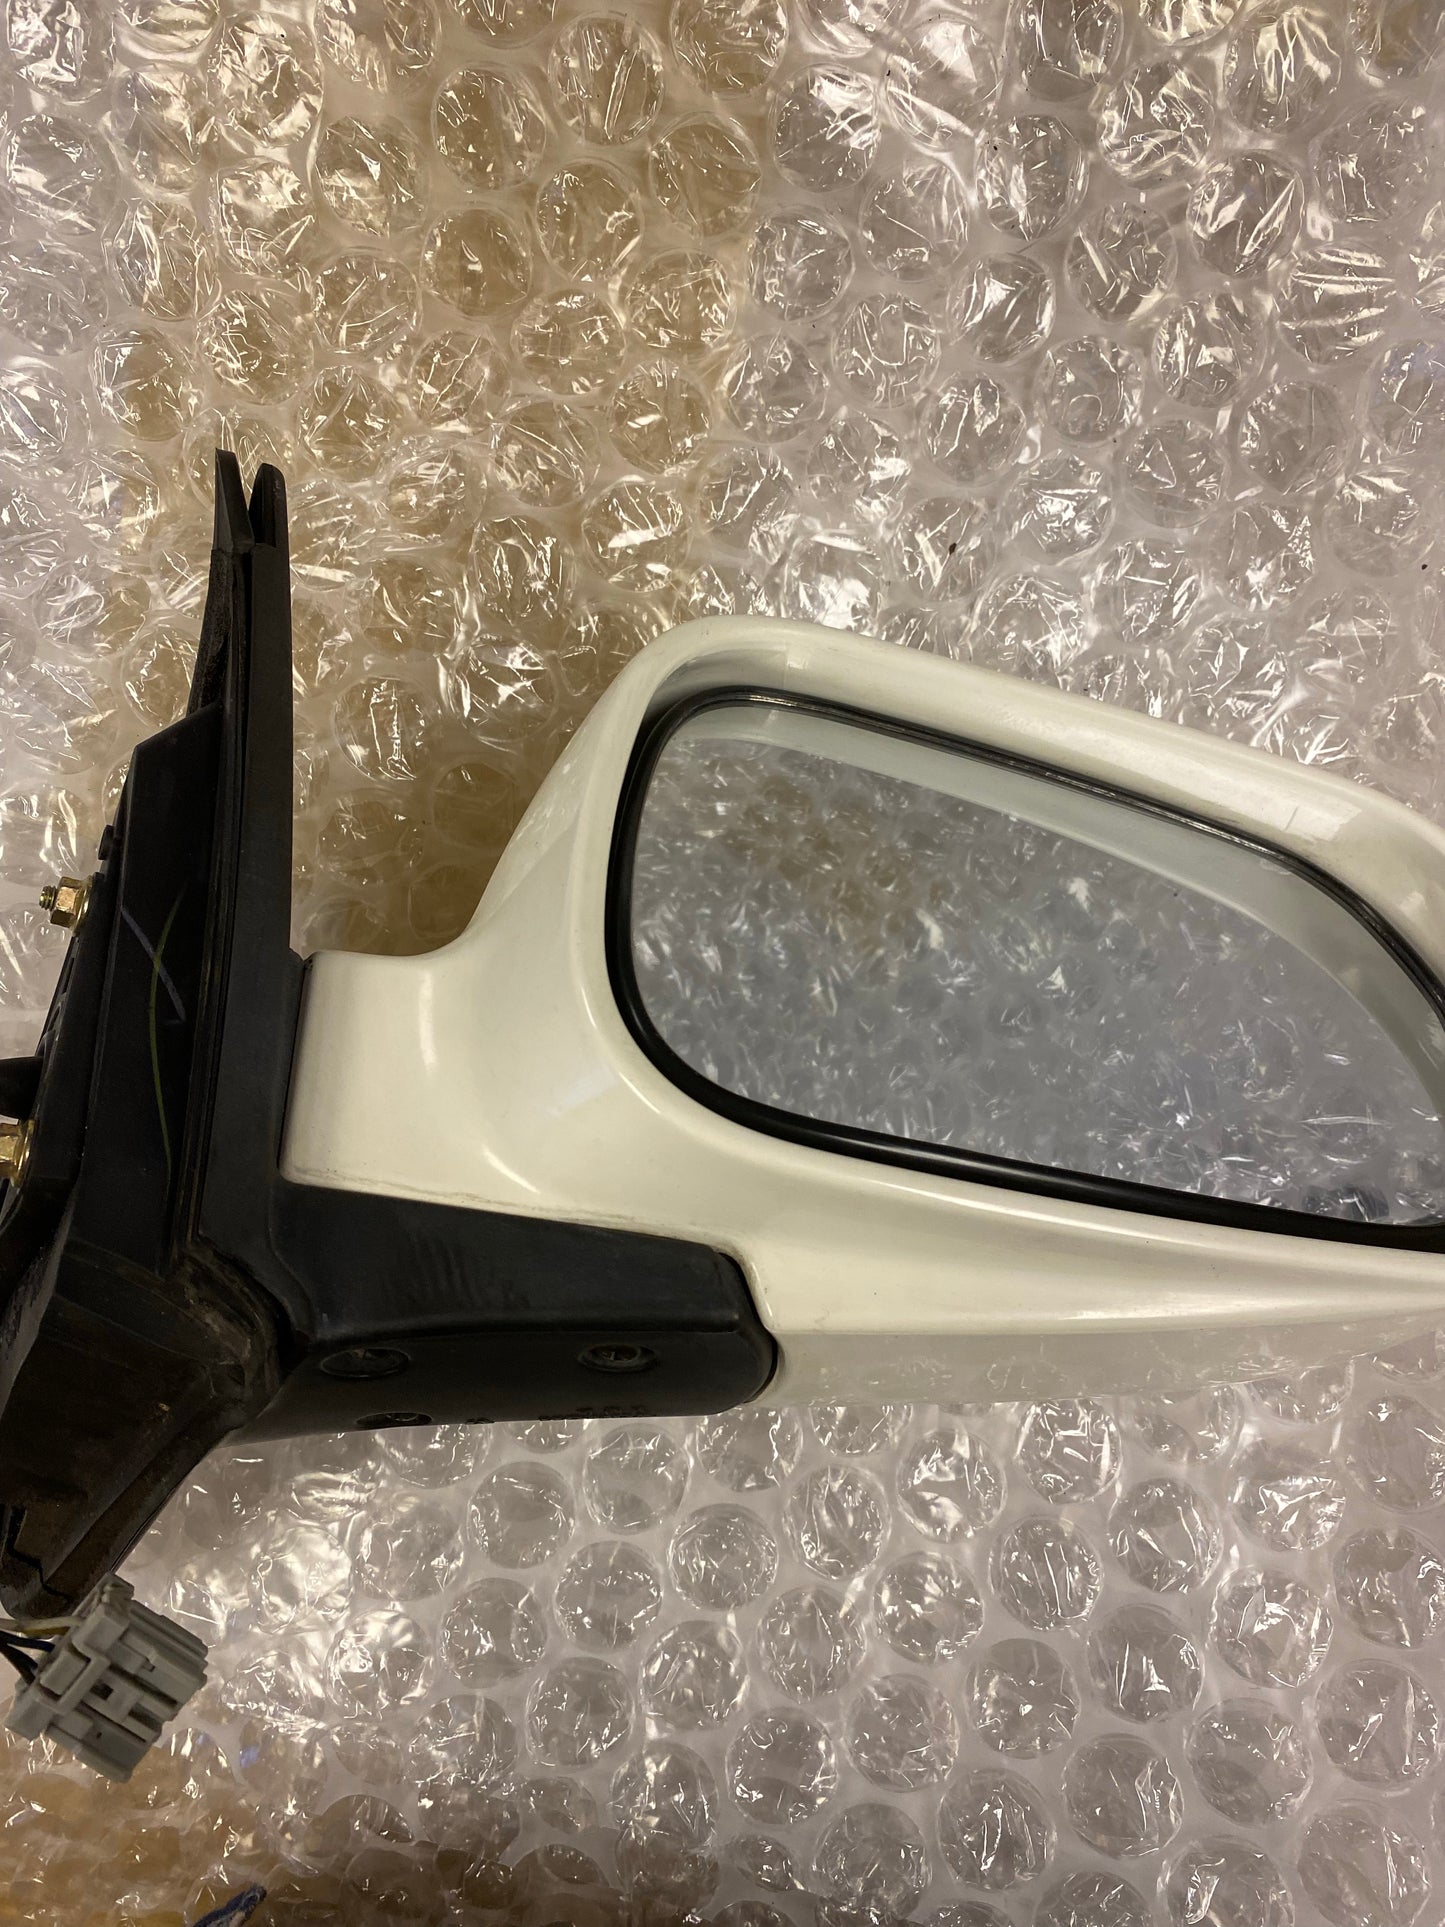 Honda Integra DC5 Right Driver Door Wing Side Mirror RHS White Damaged Cover